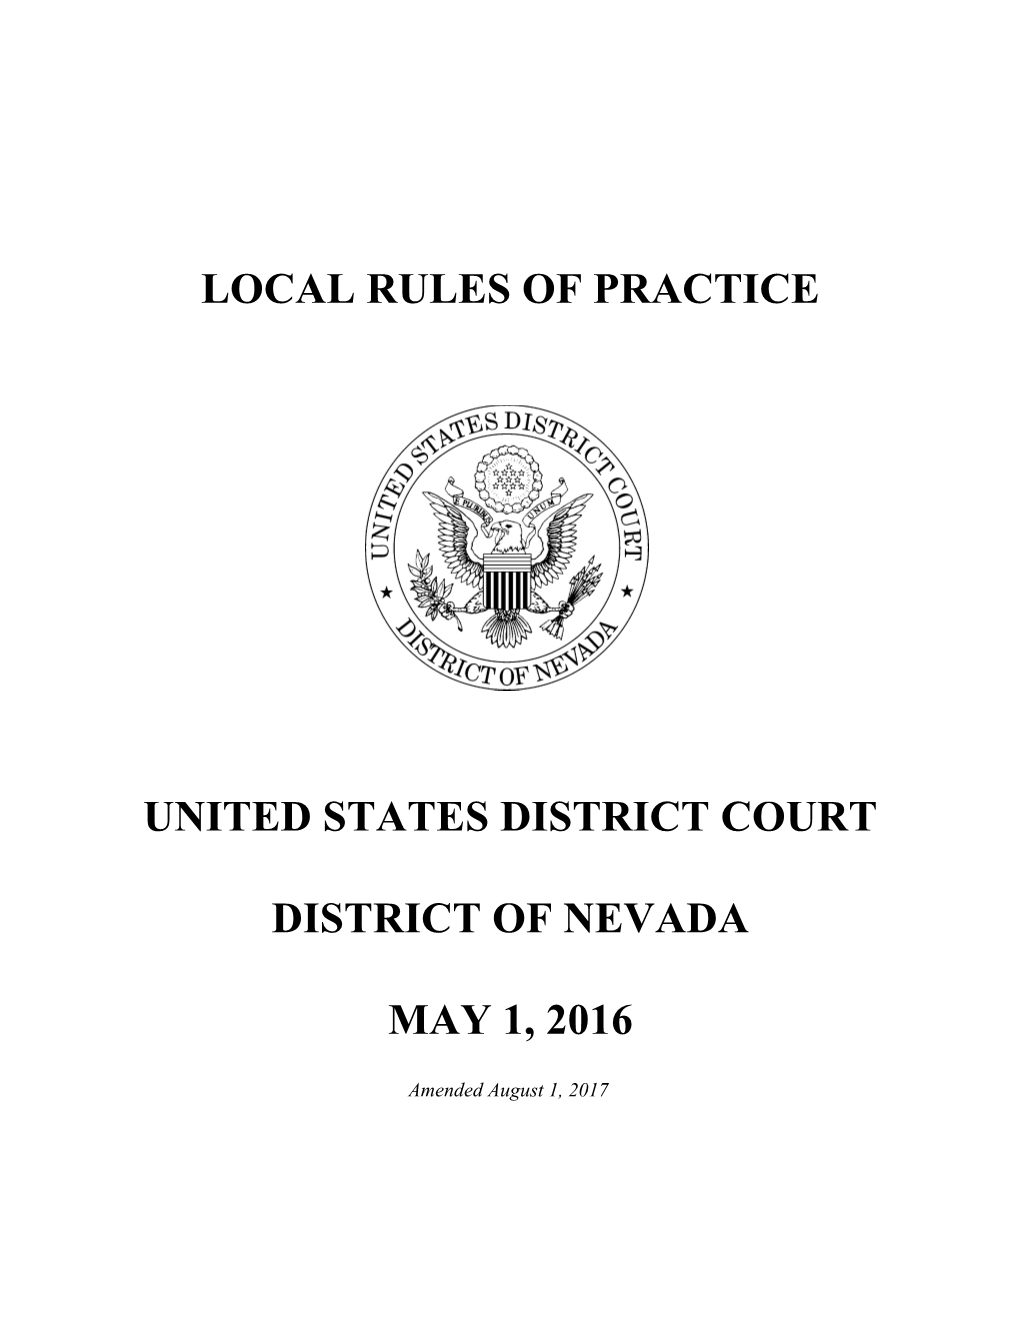 Local Rules of Practice United States District Court District of Nevada May